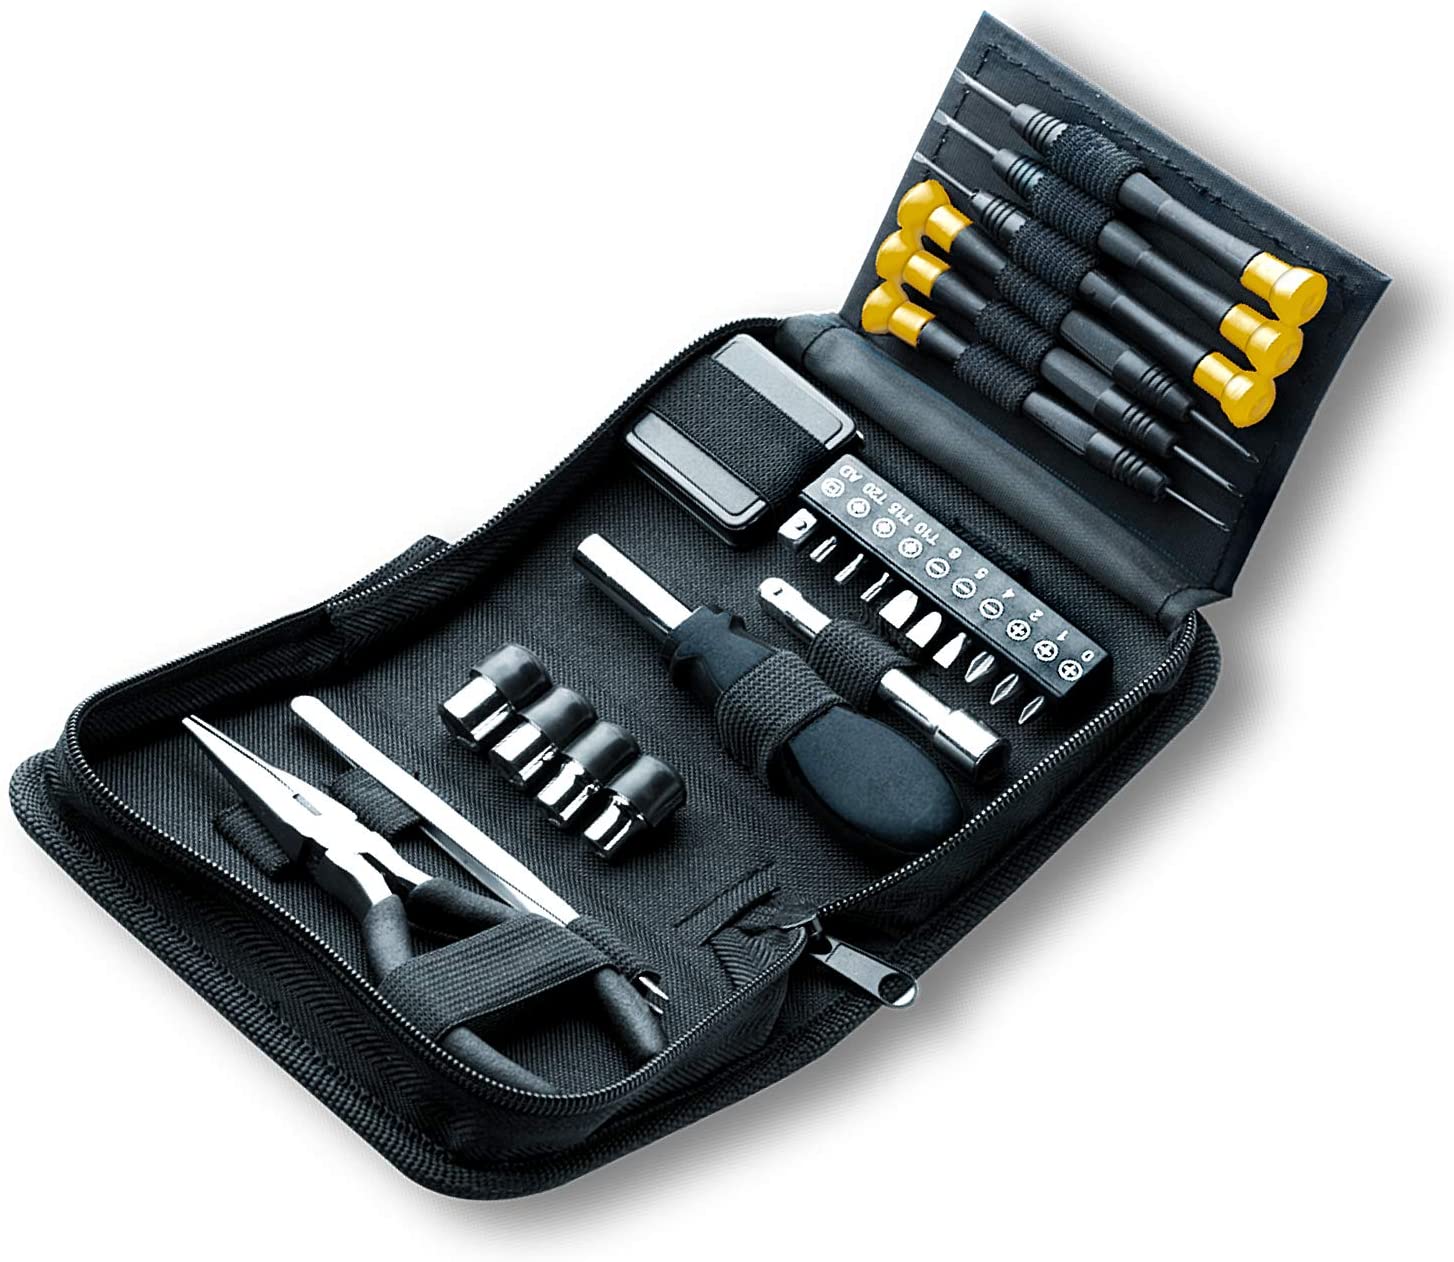 gifts for engineers - Tri-Fold Mini Tool Set